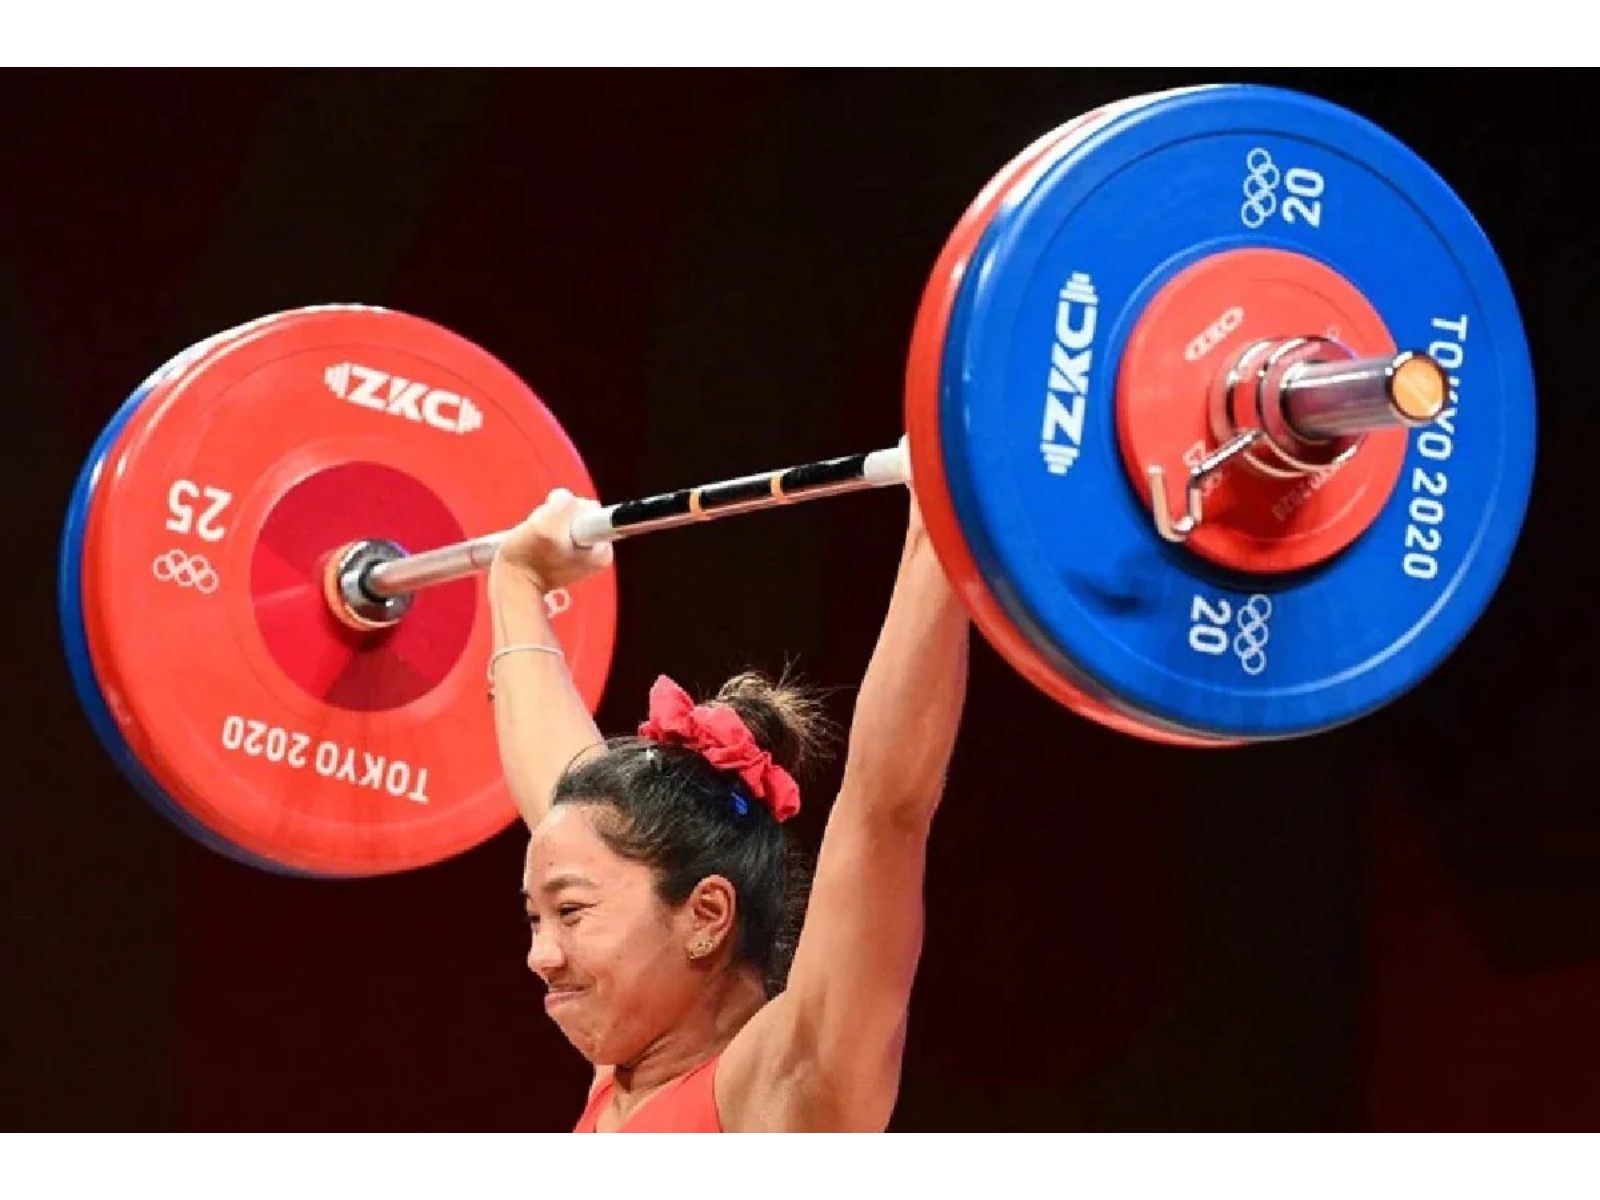 EXPLAINED: Why Weightlifting Is Under Olympic Exit Cloud And How Sports Are  Added To The Games - News18